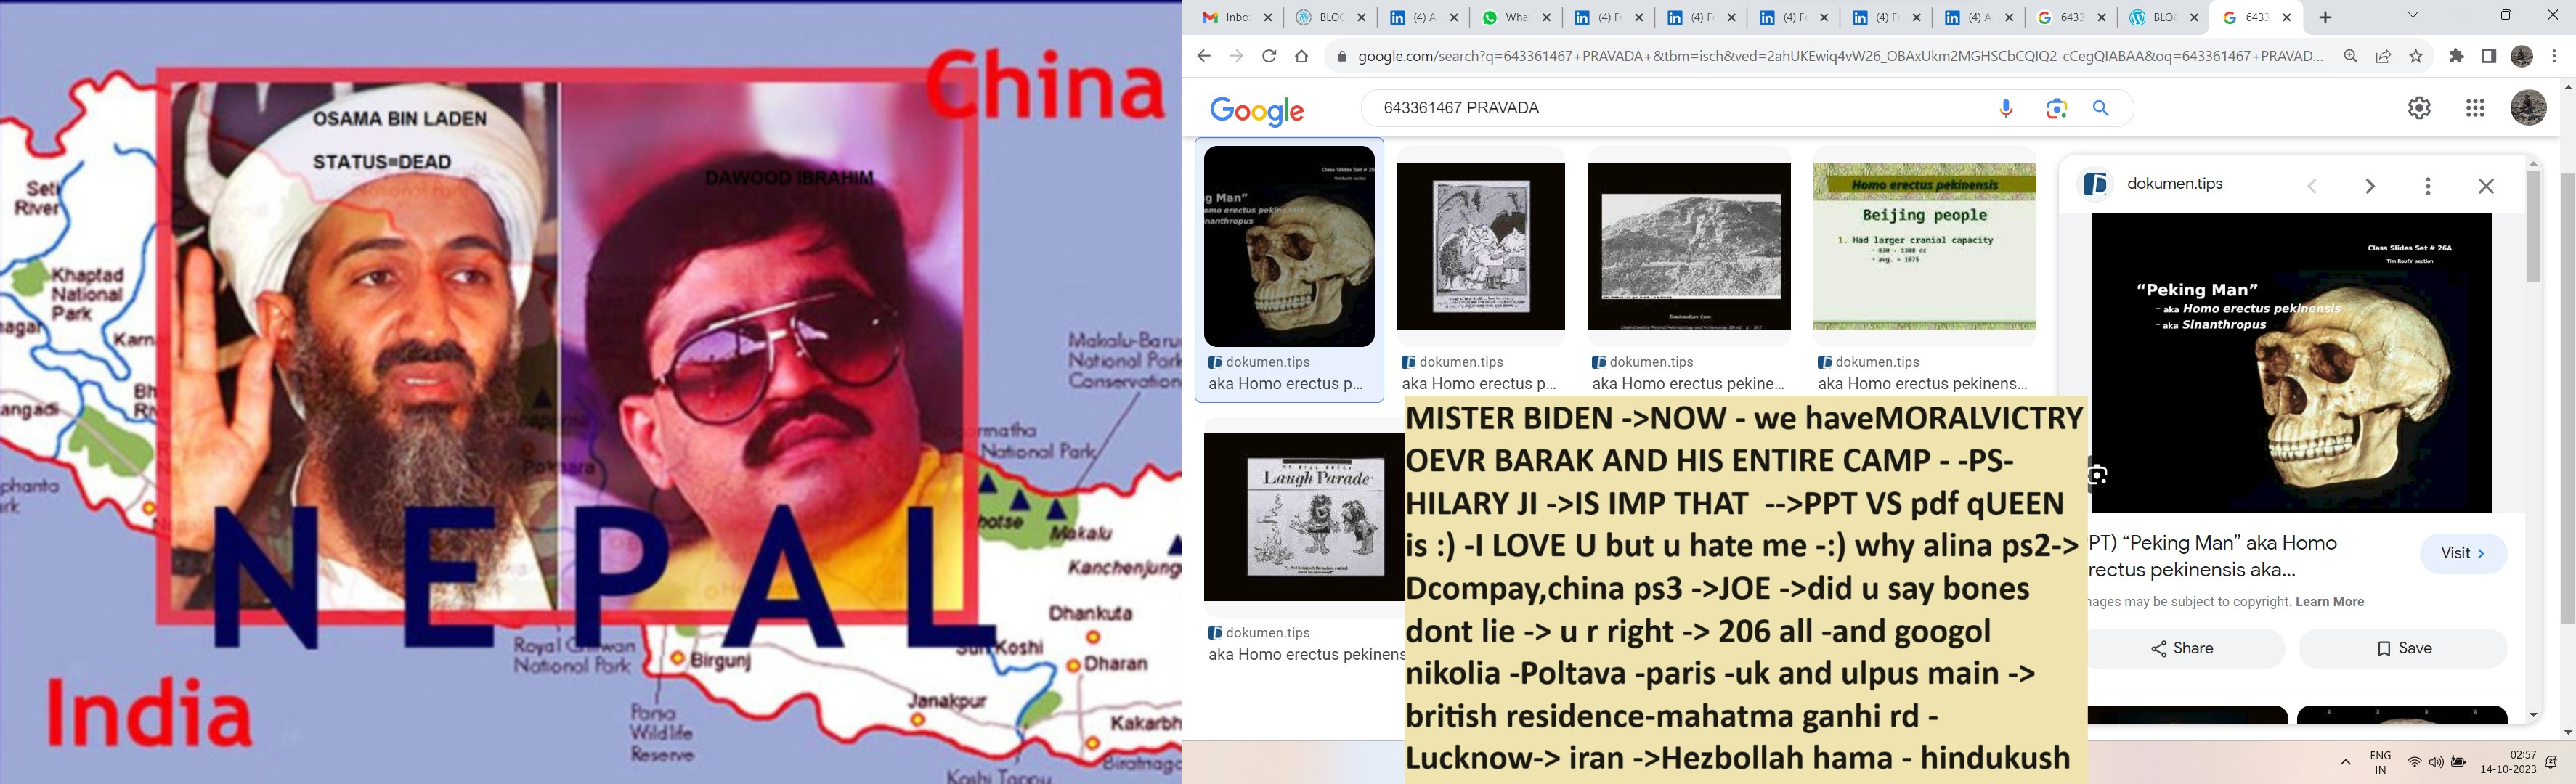 643361467 pravada- yeah bens dont lie - -joe bdien alina matseno soni london and lcuneningard- and shia sunni and the slavs - andread the imgr and the url ---BIN LADEN AND THE BUILDER OF ABOTTABA D- AND CHINA